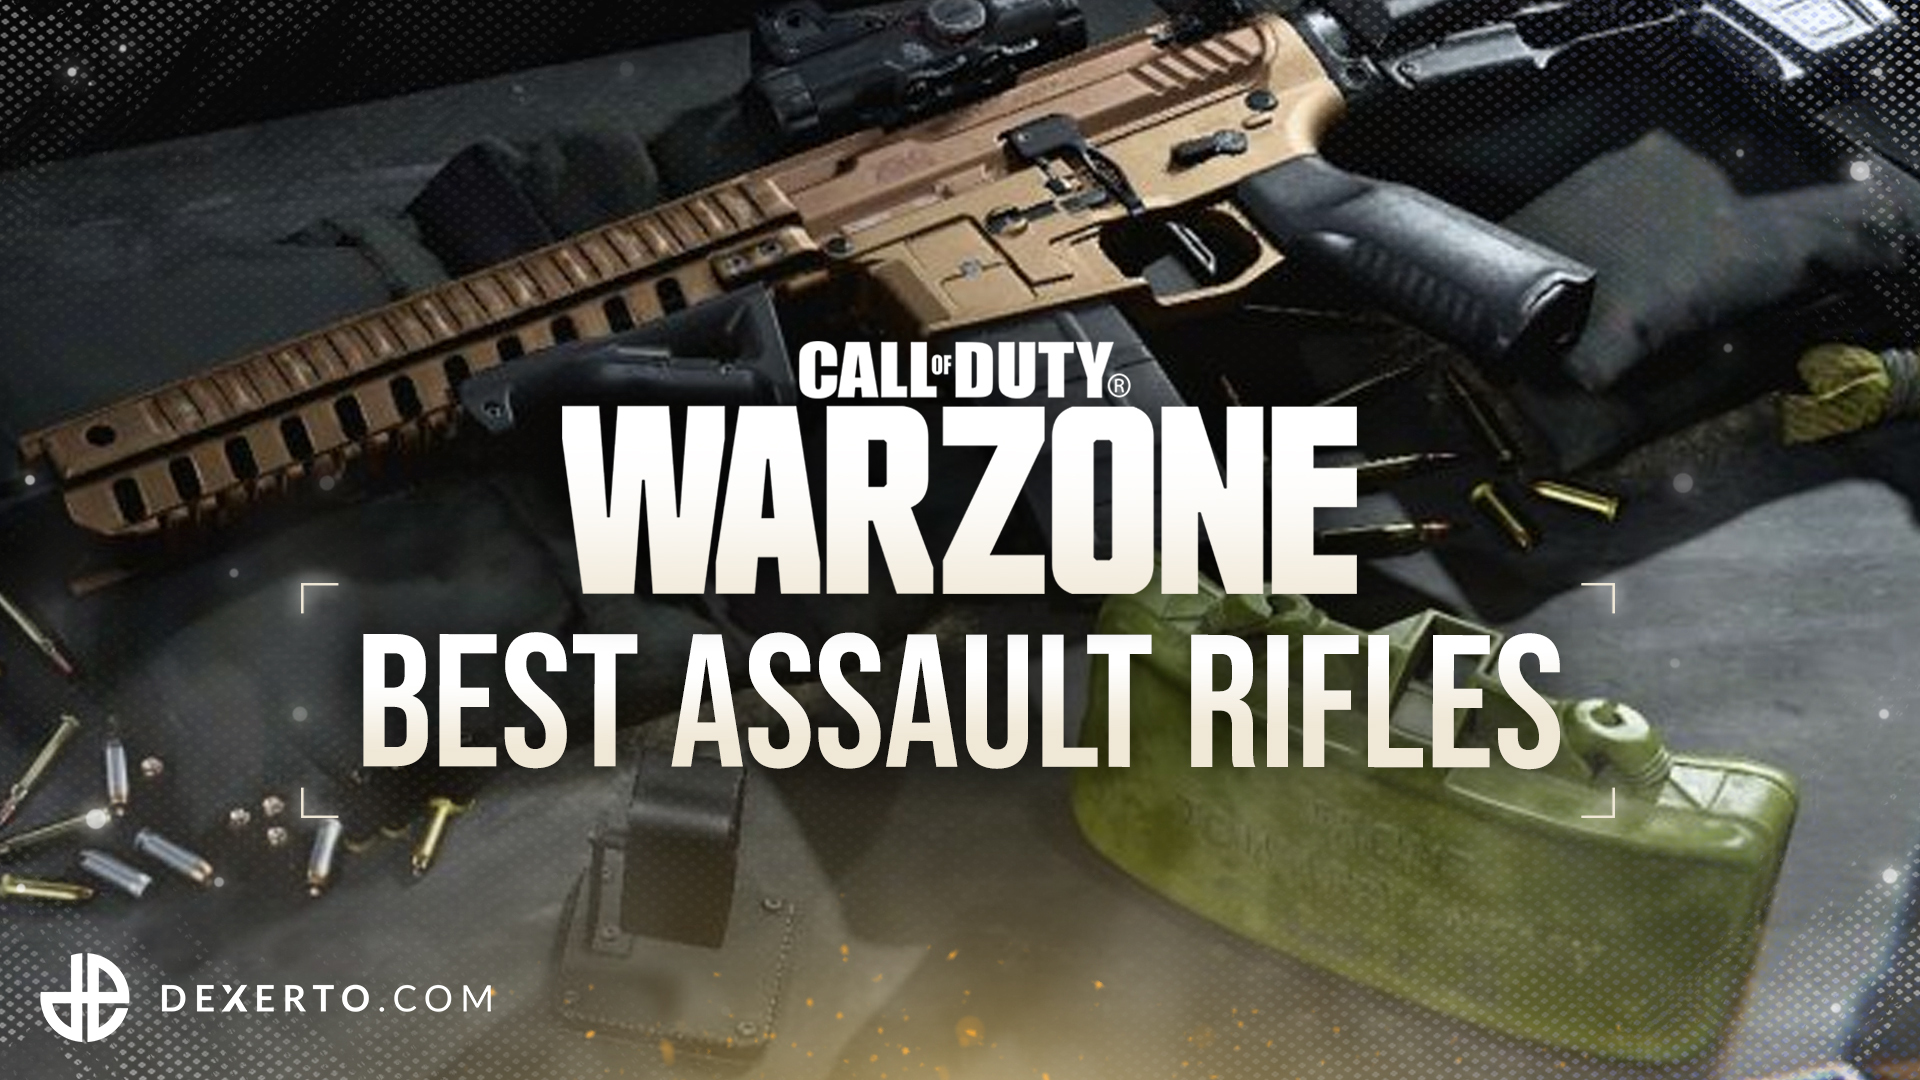 Best Assault Rifles to use in Call of Duty: Warzone - Dexerto